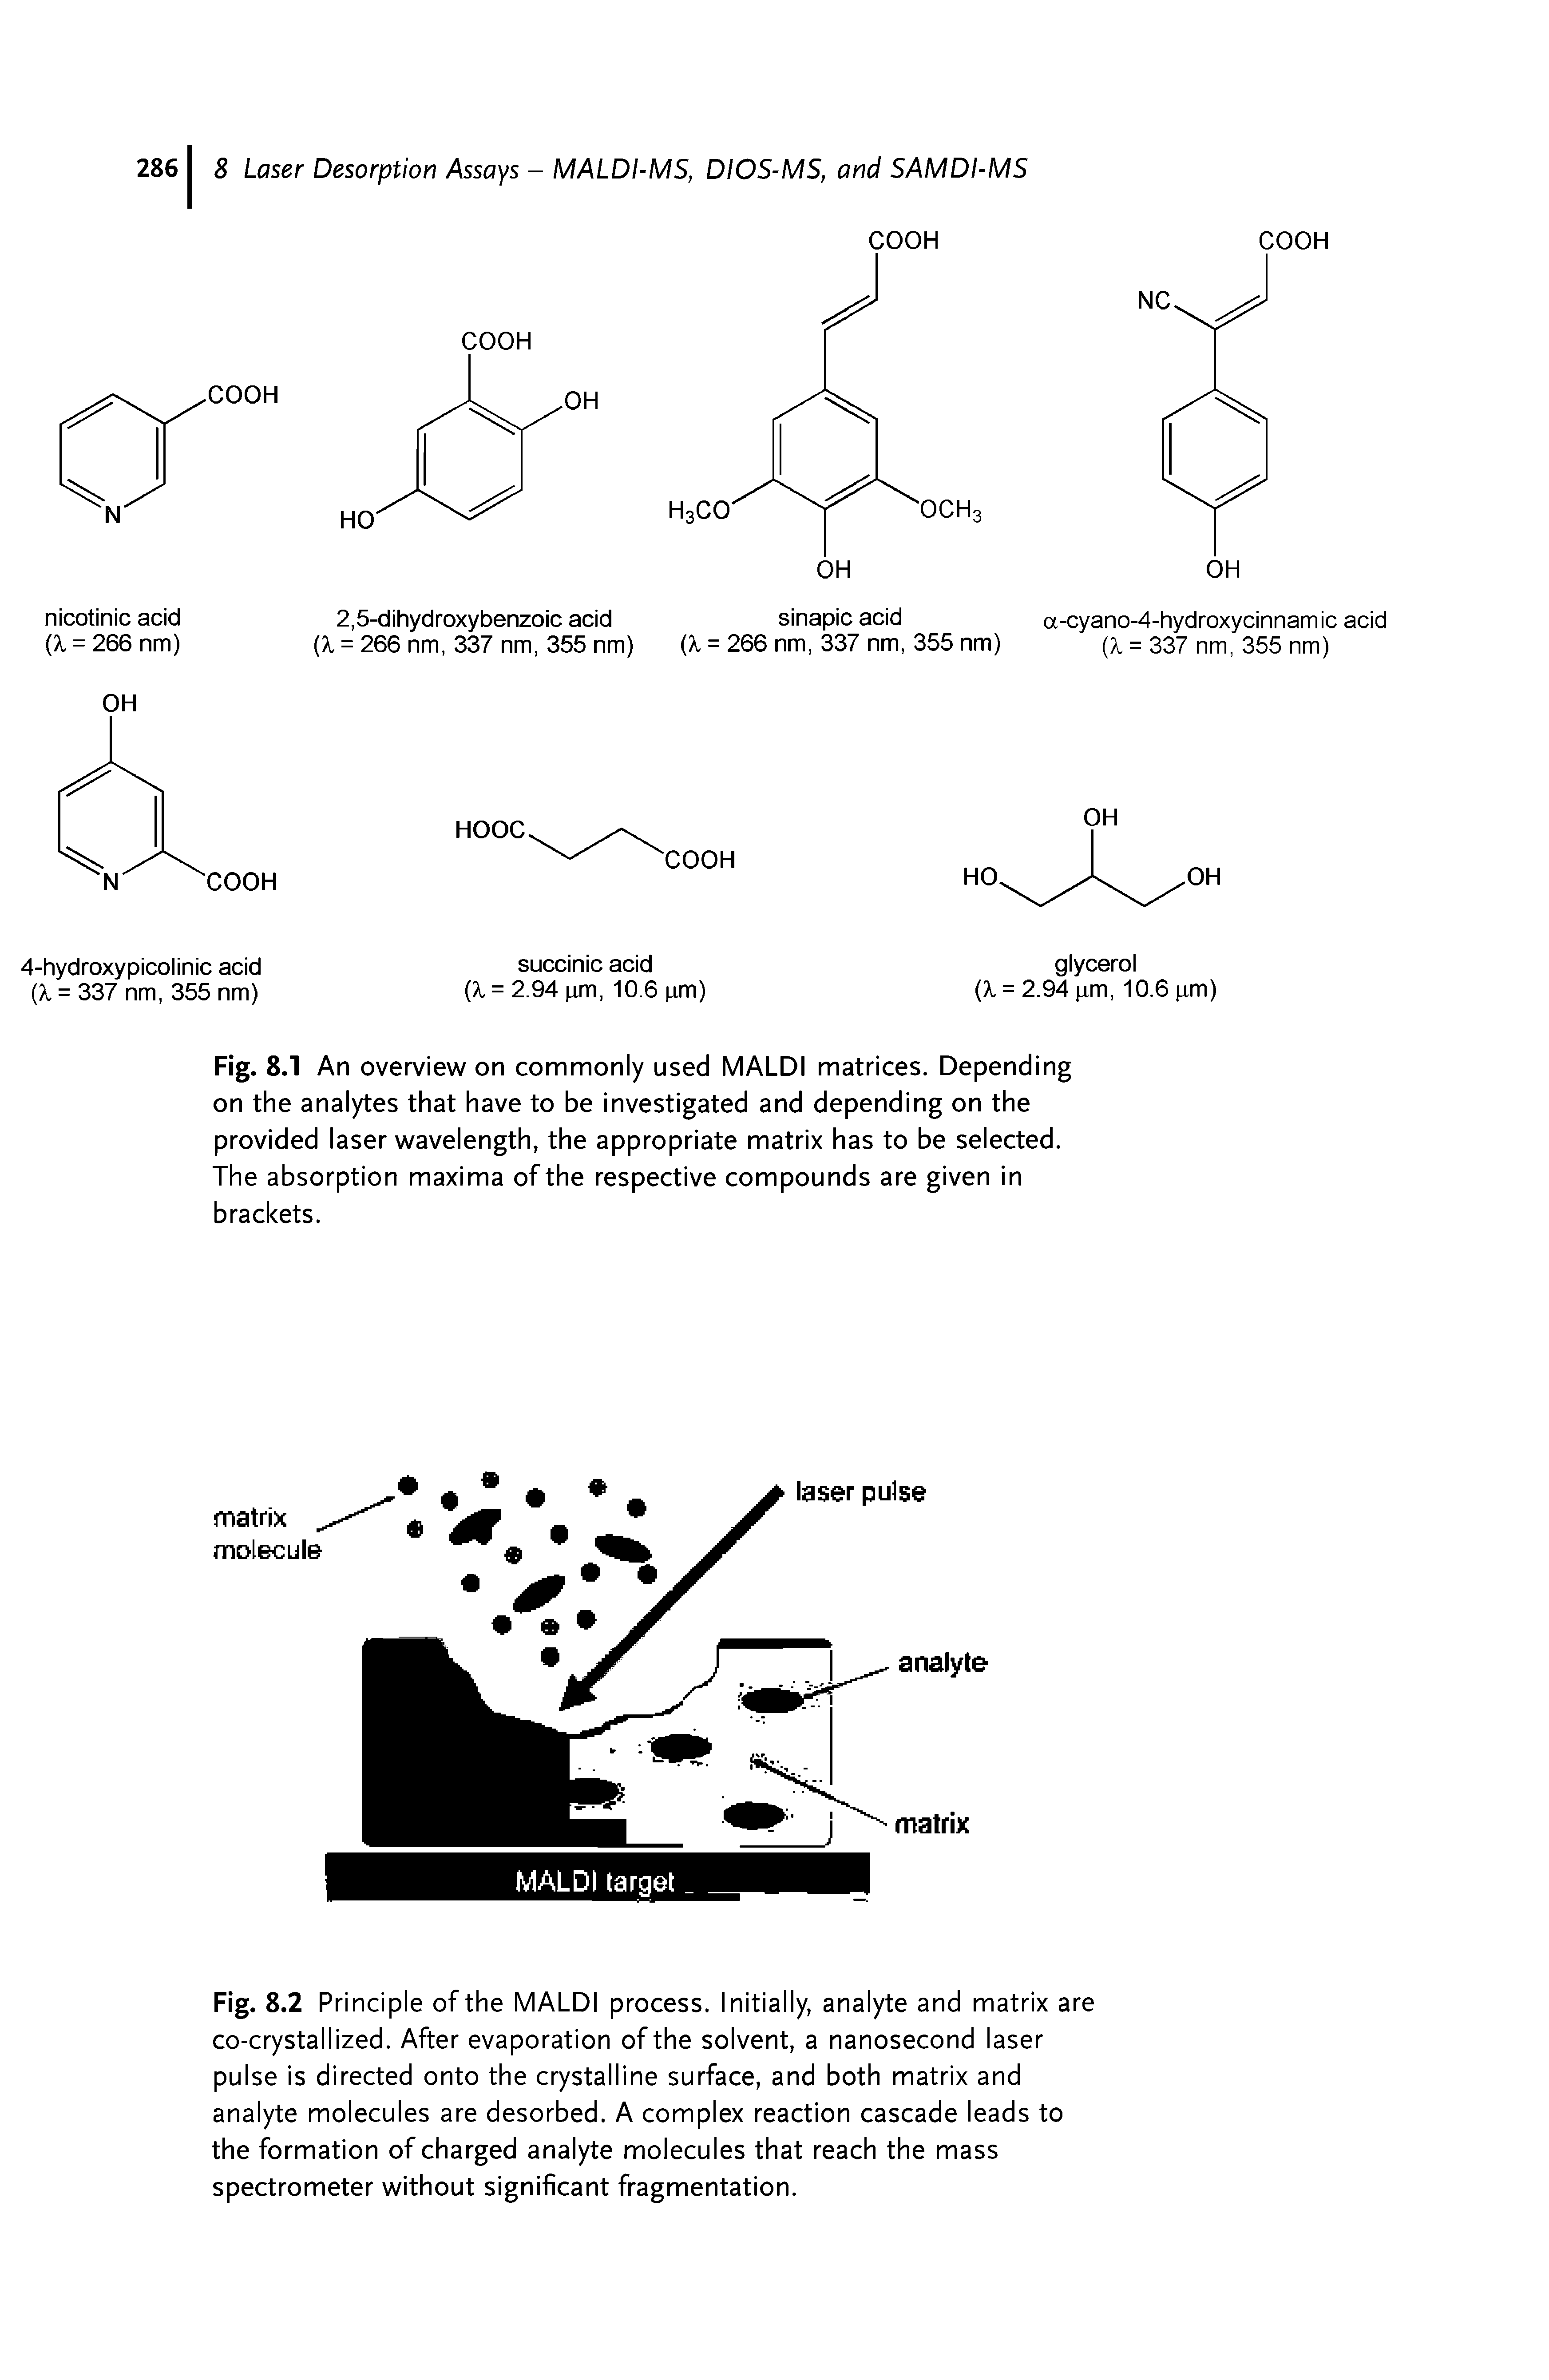 Fig. 8.2 Principle of the MALDI process. Initially, analyte and matrix are co-crystal I ized. After evaporation of the solvent, a nanosecond laser pulse is directed onto the crystalline surface, and both matrix and analyte molecules are desorbed. A complex reaction cascade leads to the formation of charged analyte molecules that reach the mass spectrometer without significant fragmentation.